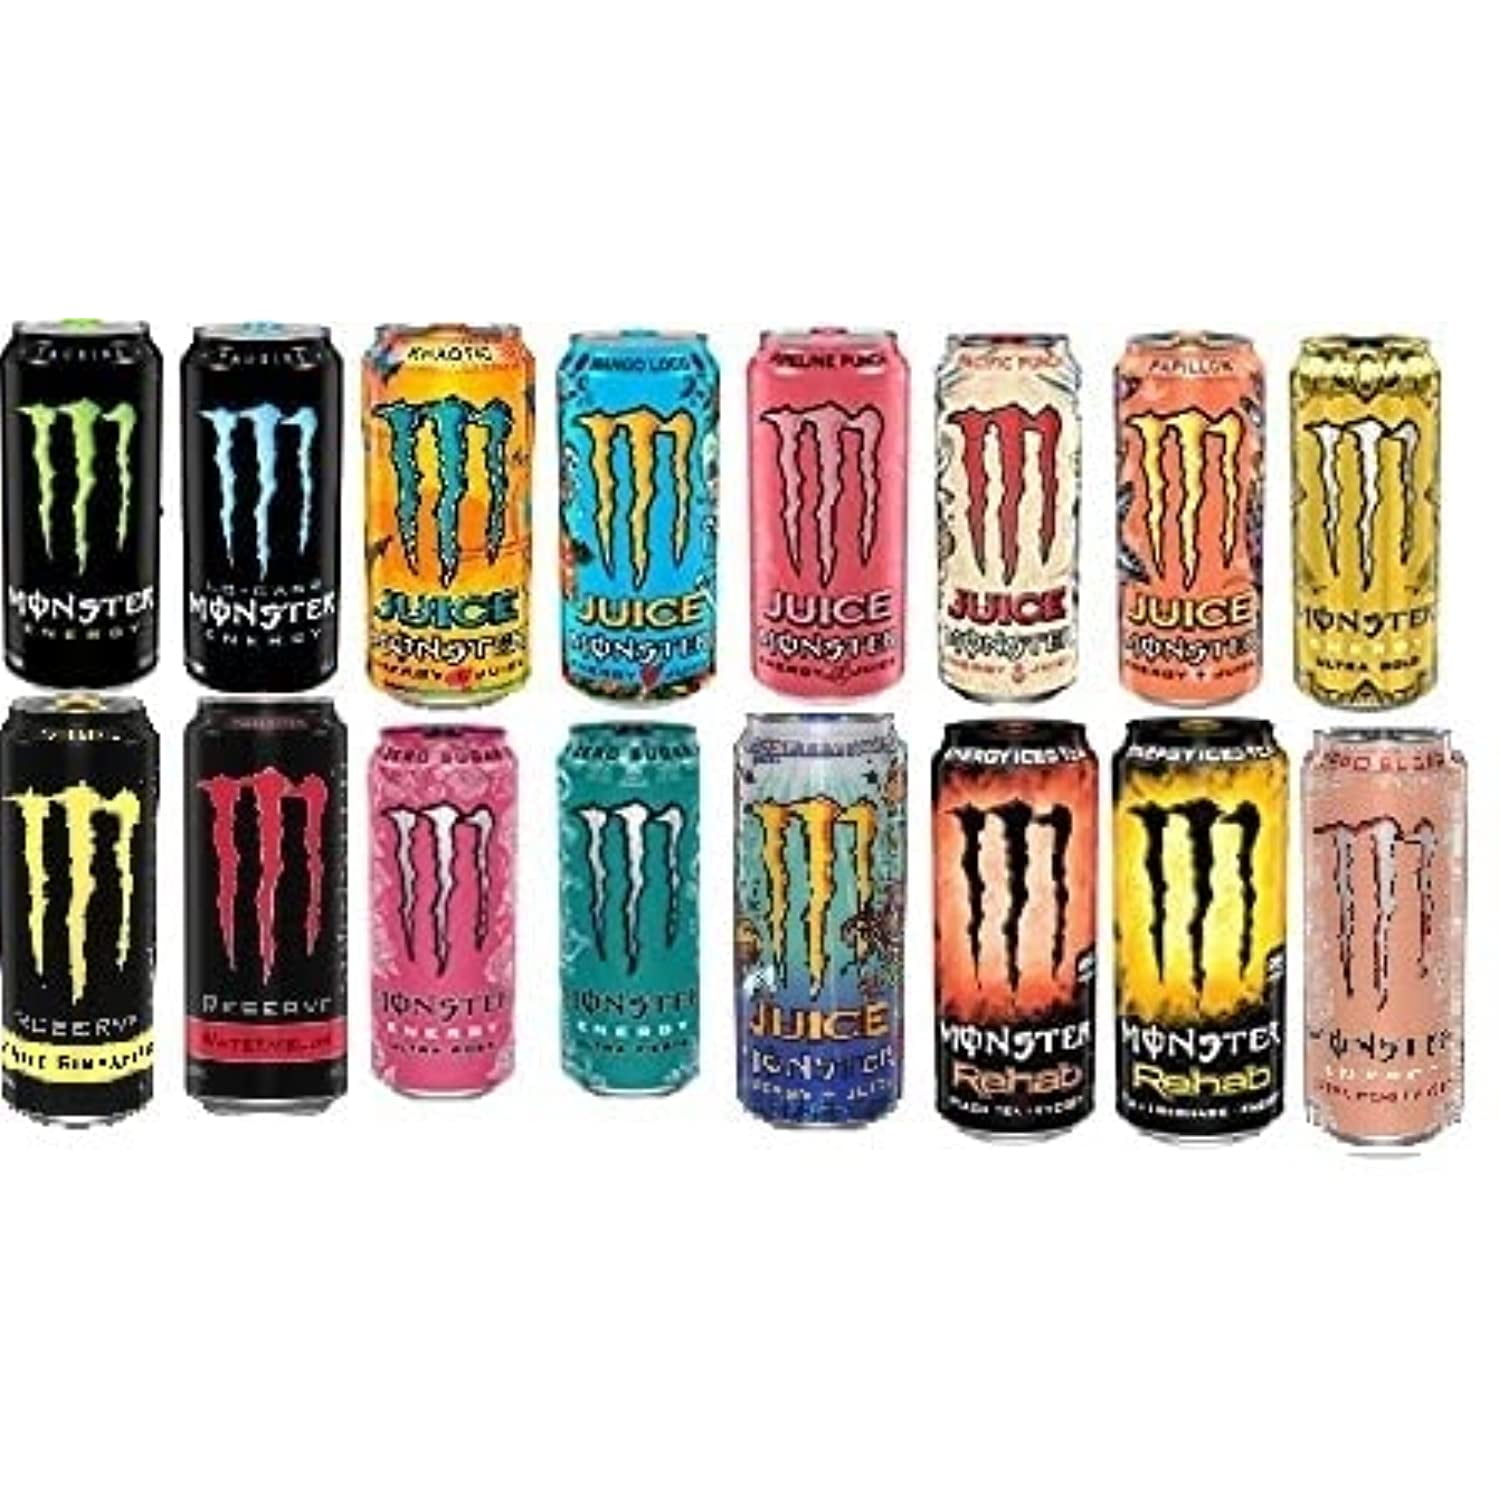 Monster Energy Drink Variety Pack - 16 Count, Size: 16 ct